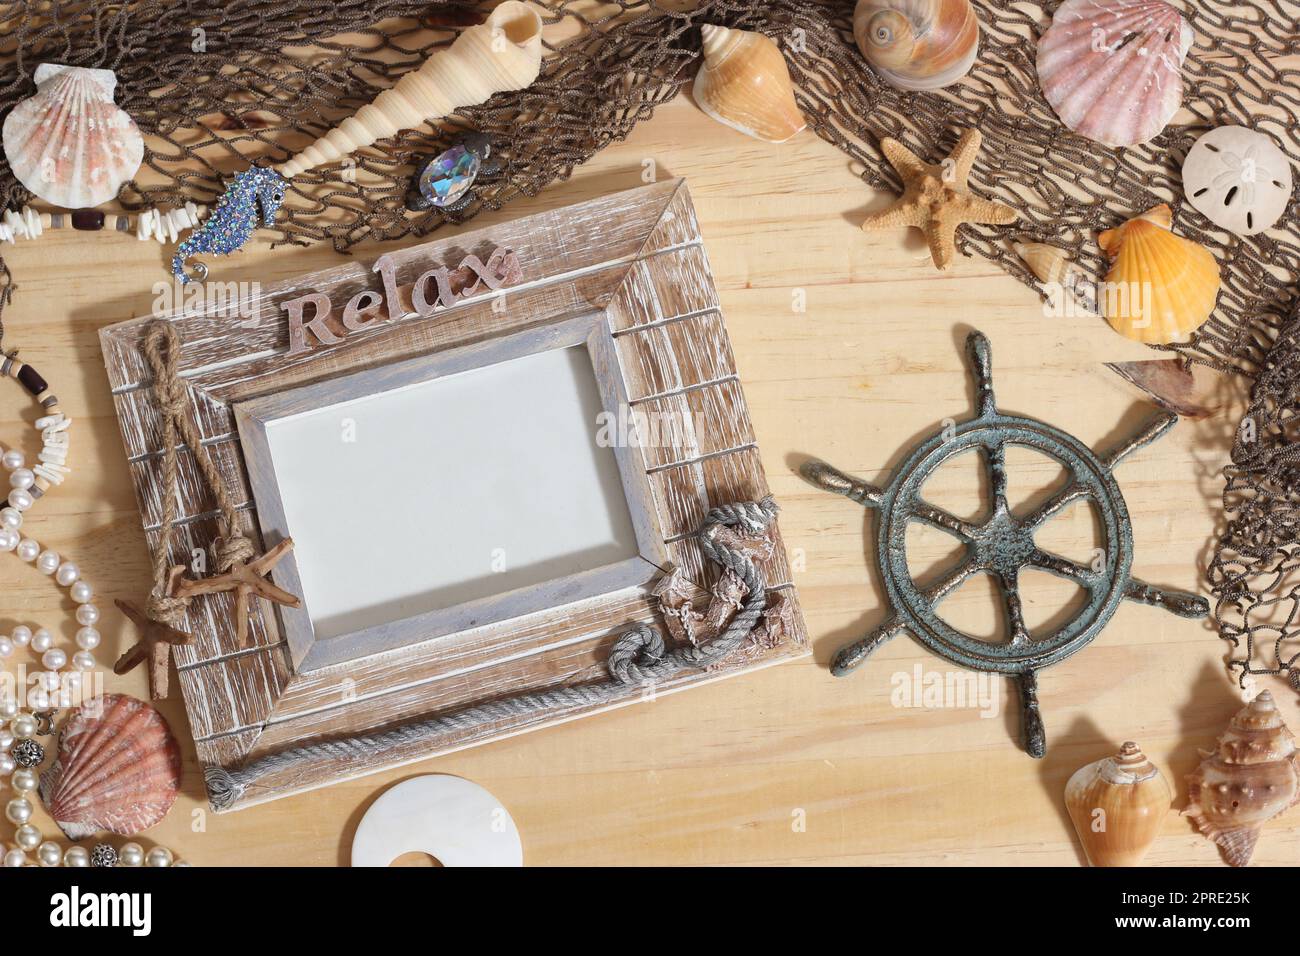 Empty Frame on Wooden Background With Sea Shells and Fishing Net. Nautical and Coastal Theme Stock Photo